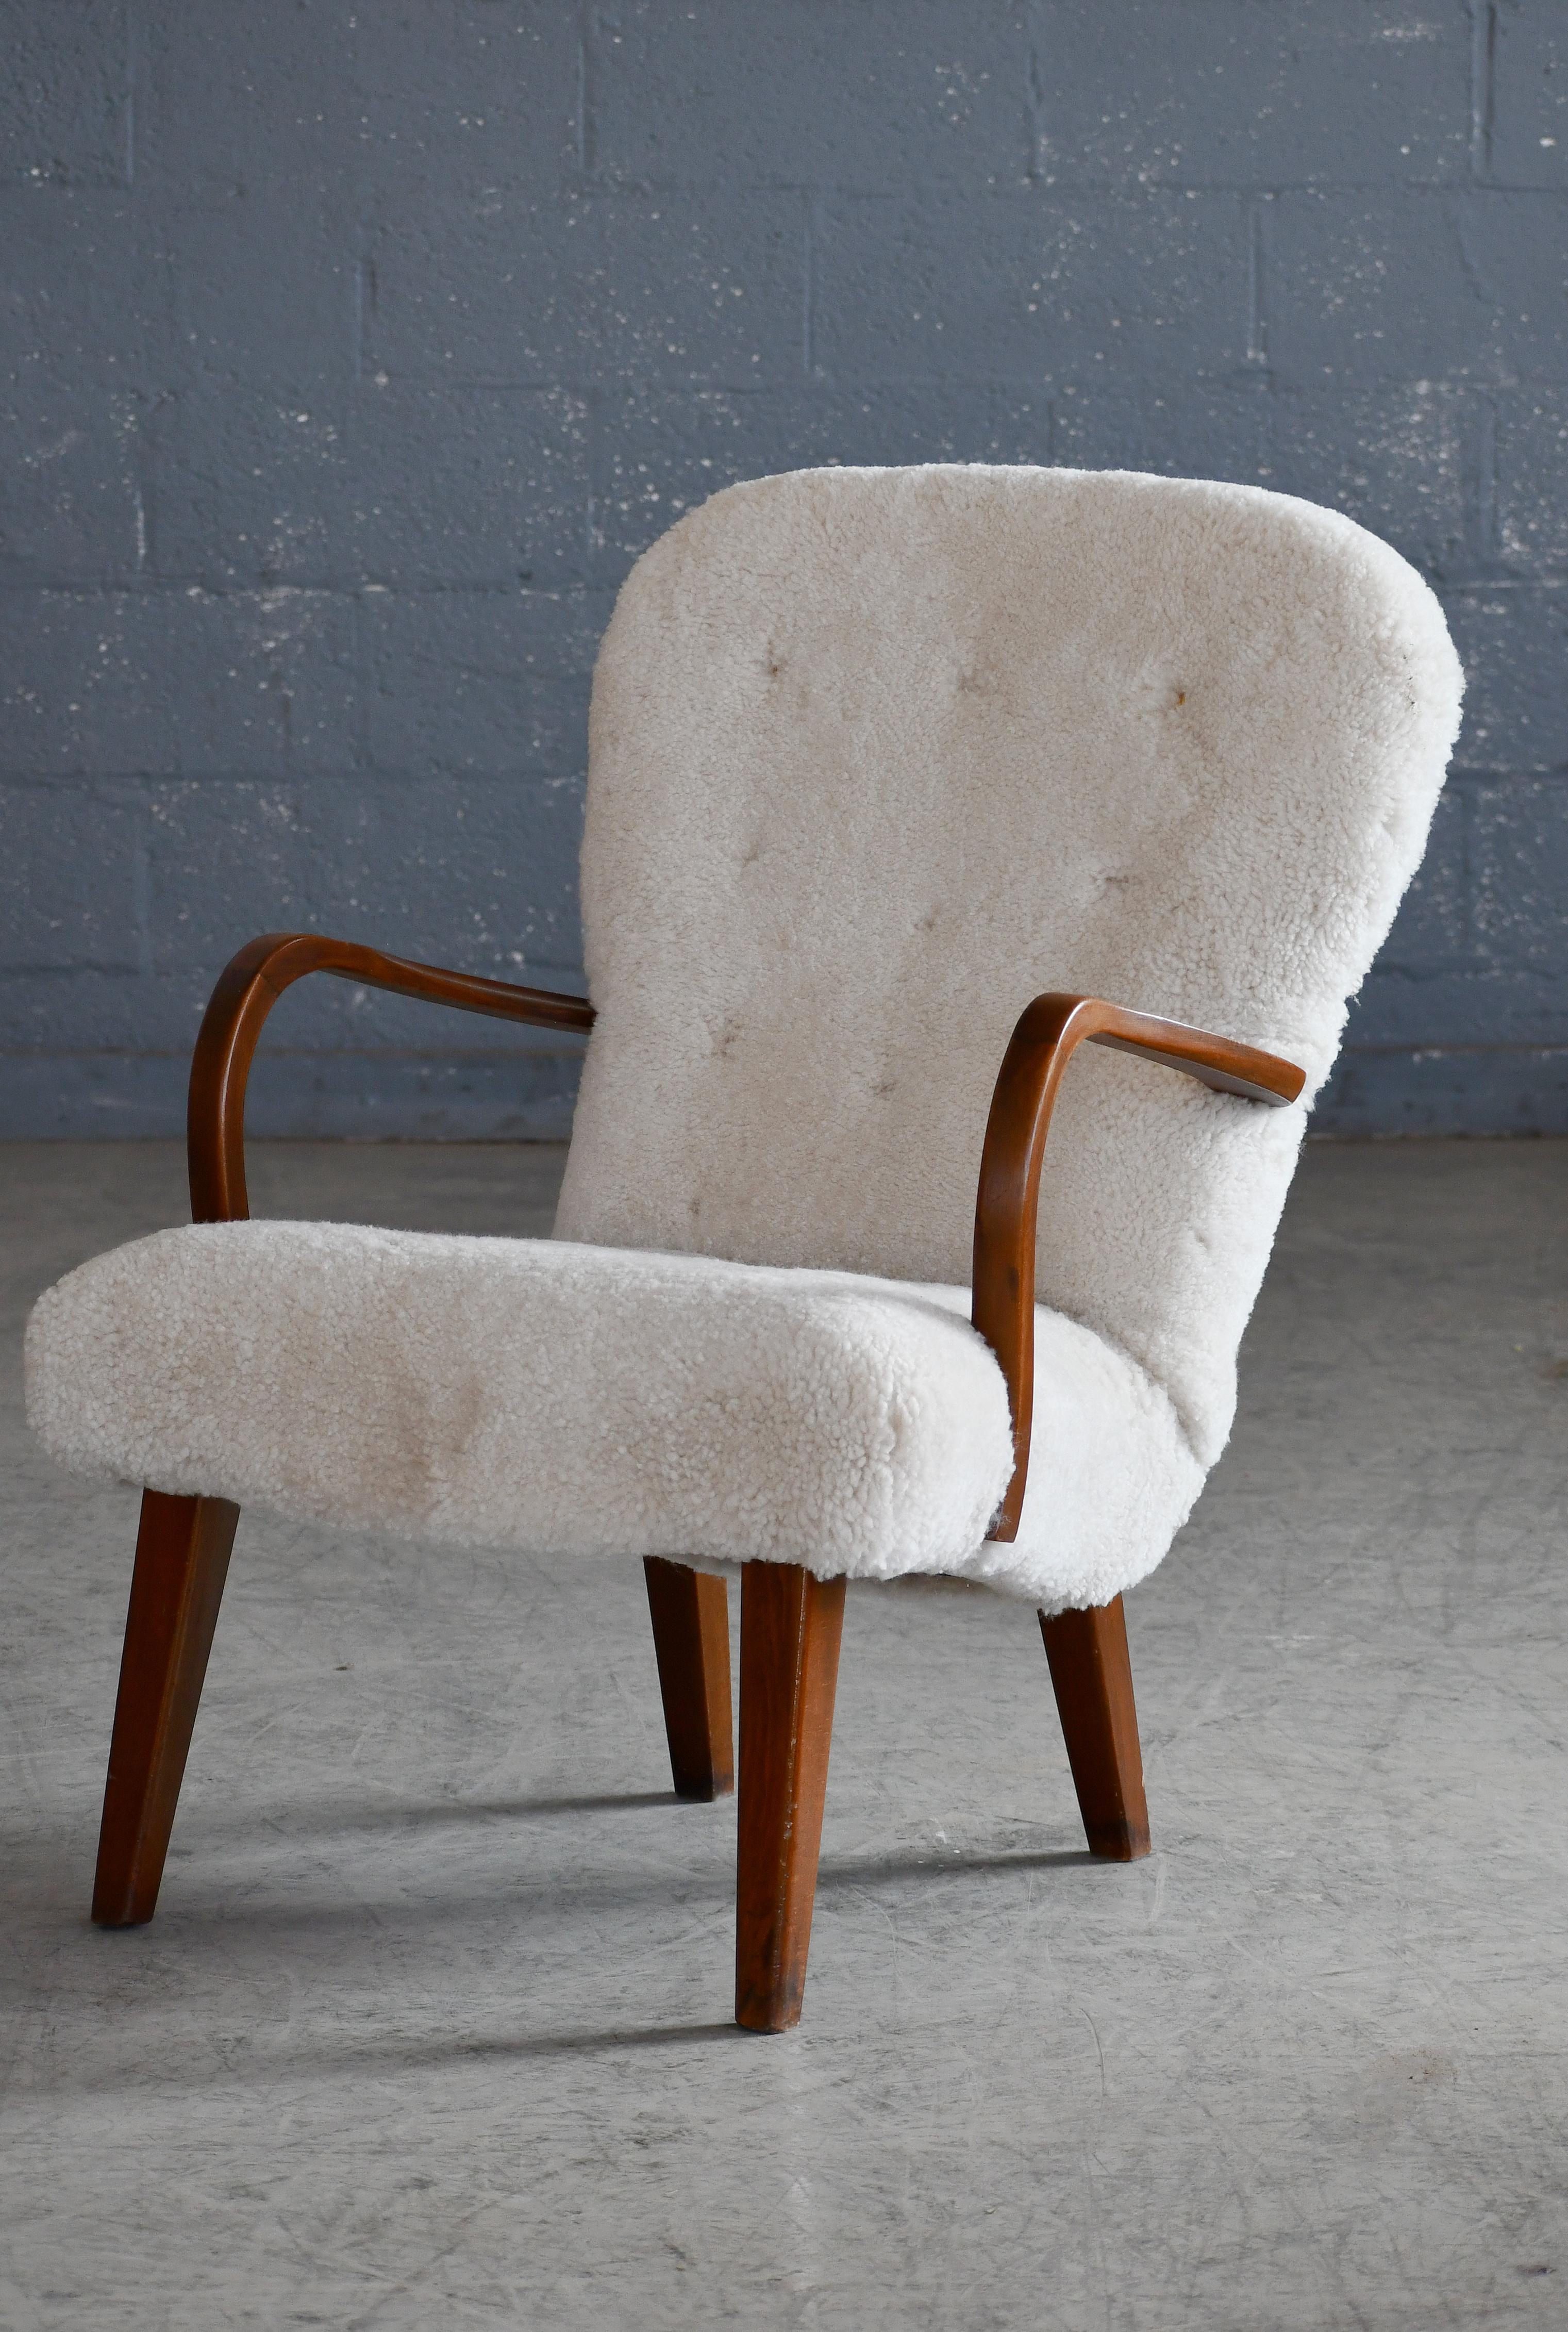 Charming clam-style lounge chair made in Denmark from stained and varnished beech wood. Recovered in luxurious putty colored curly textured sheepskin from Garrett Leather. The design bears resemblance to the famous model Pragh by Designer team